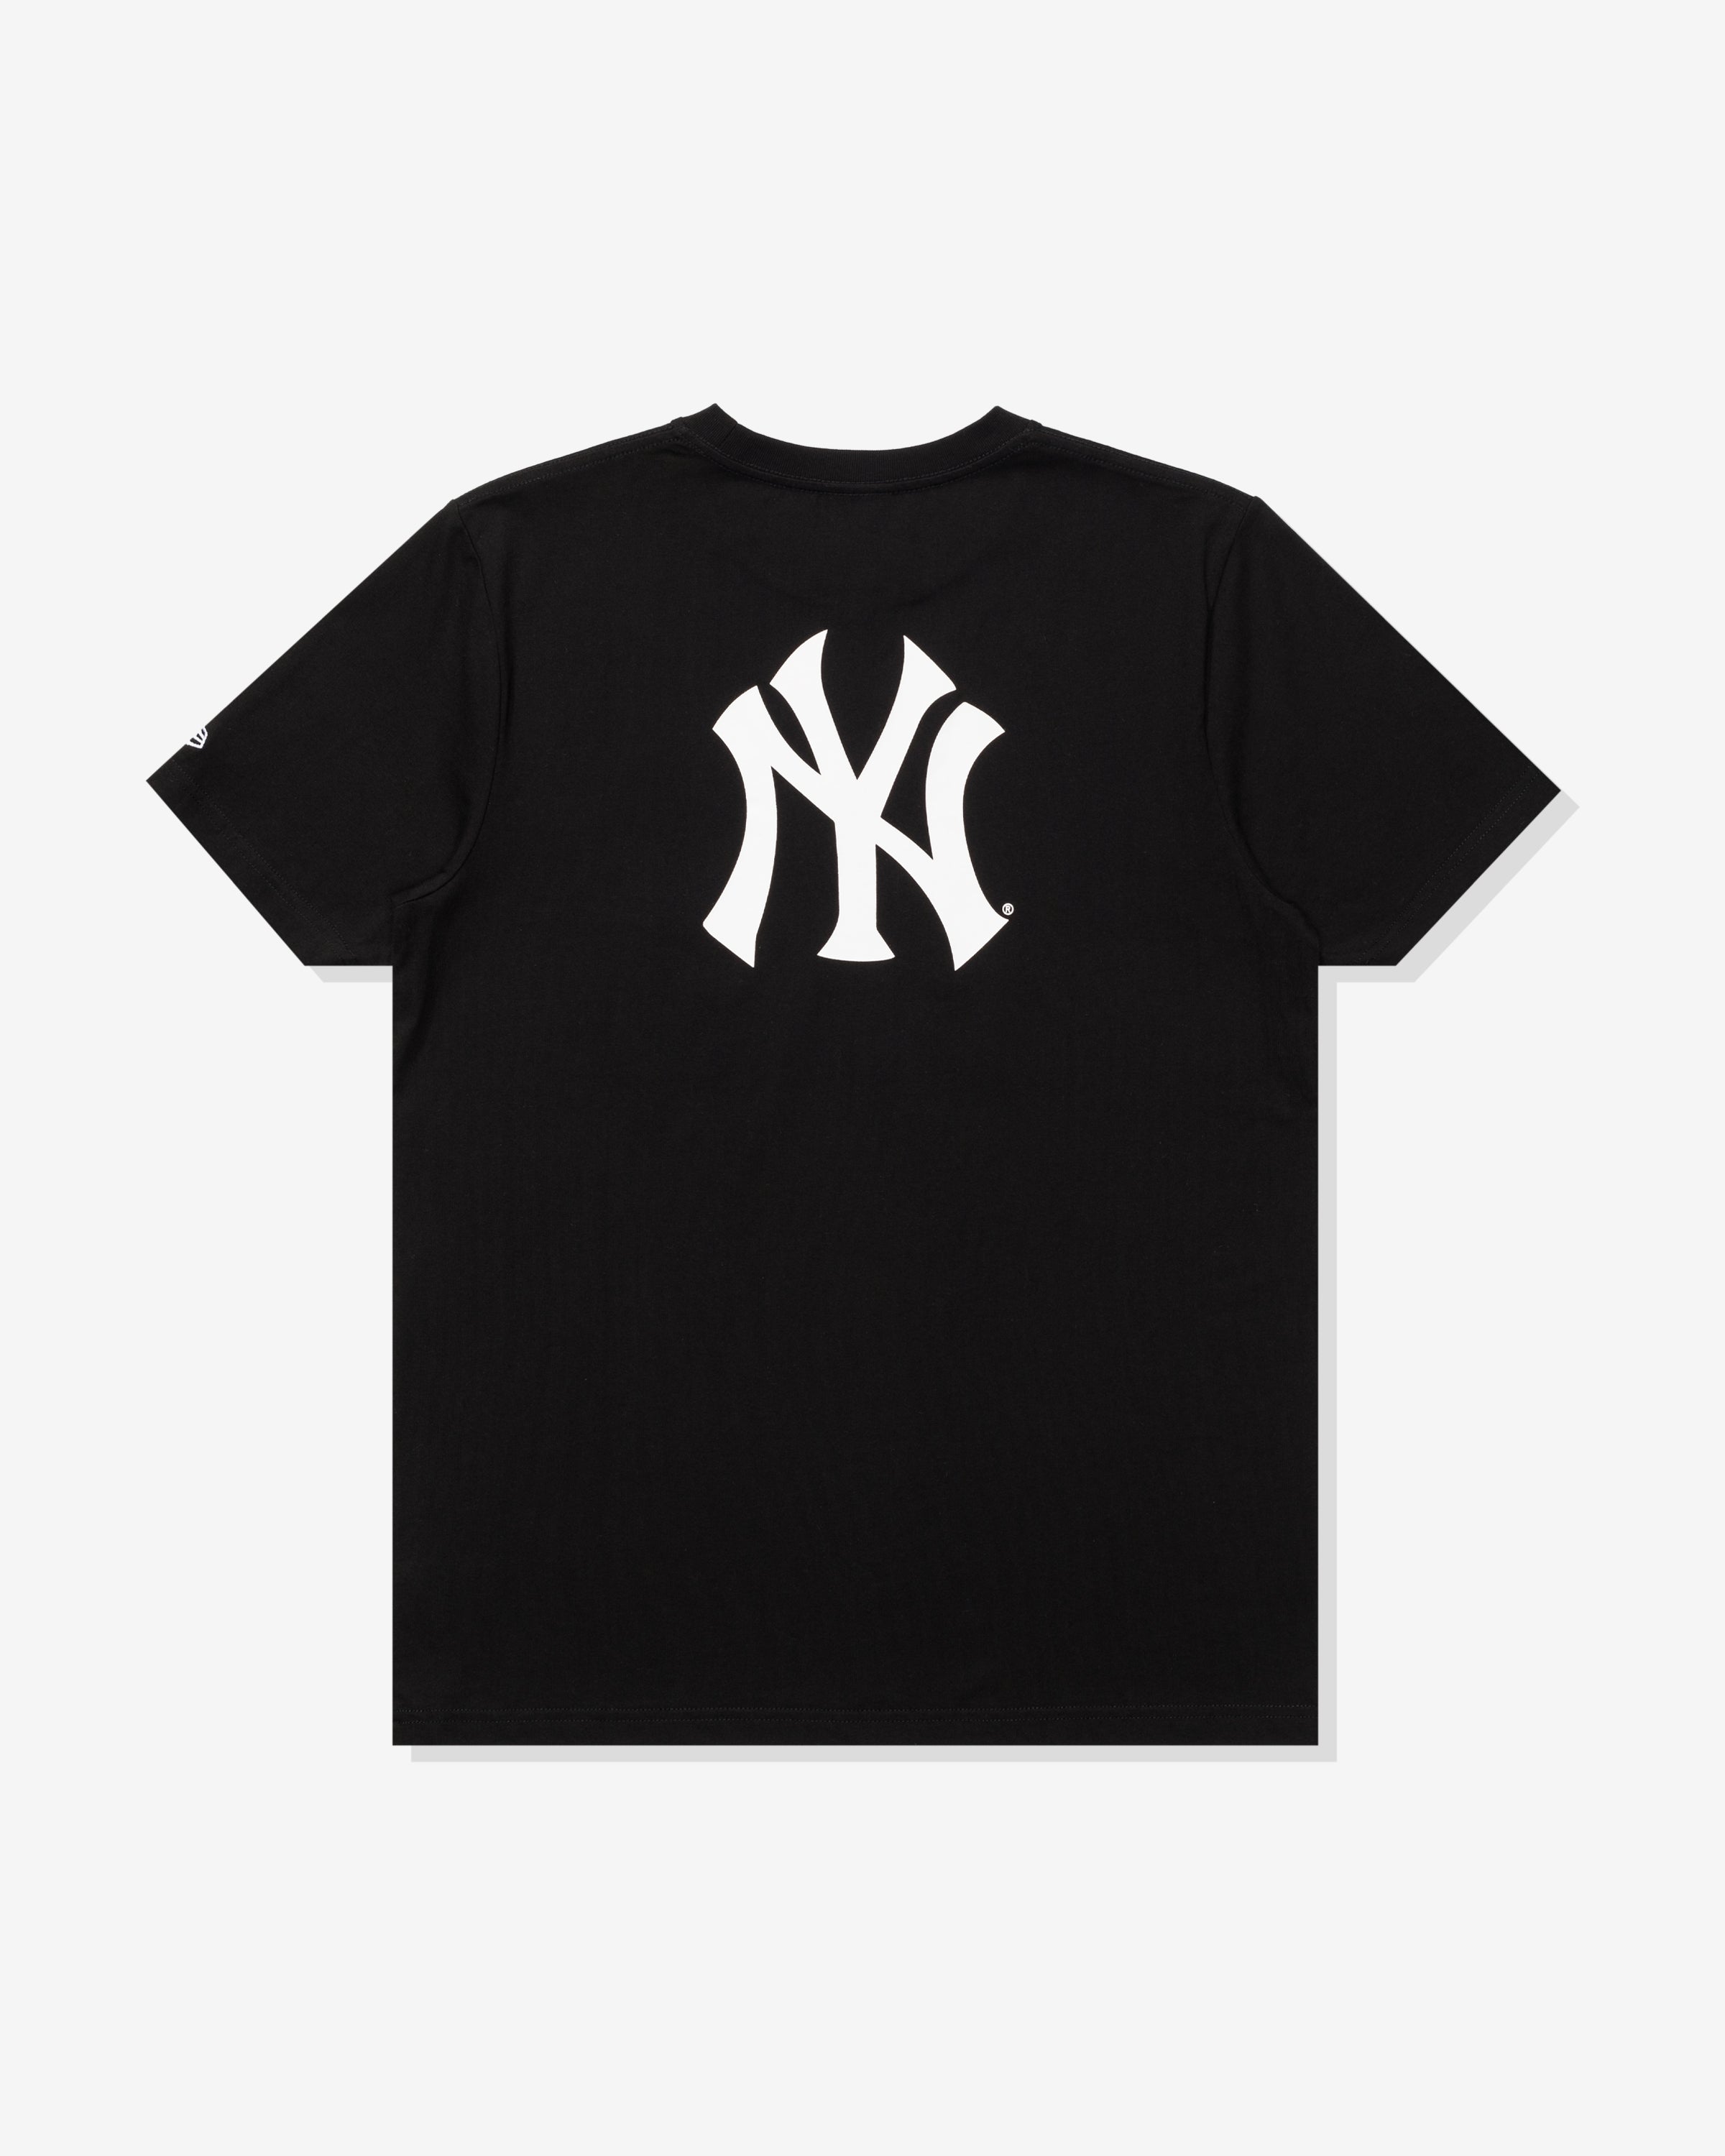 UNDEFEATED x New Era New York Yankees Collection 9.8.23